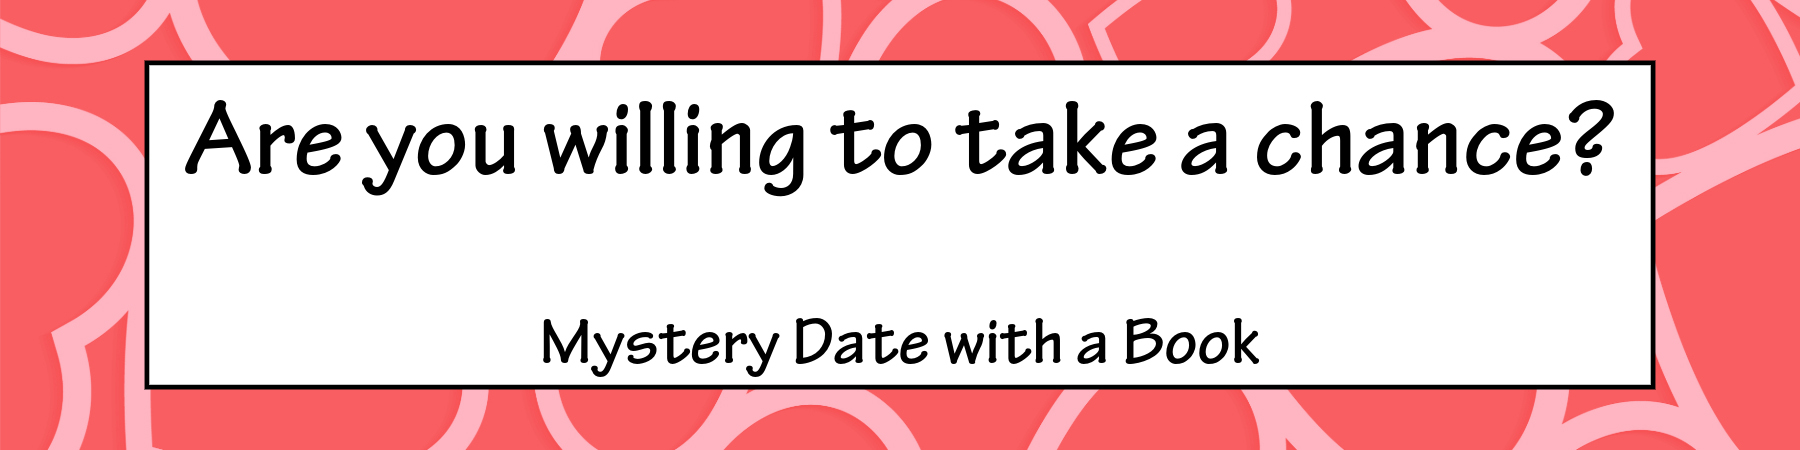 Mystery Date with a Book image